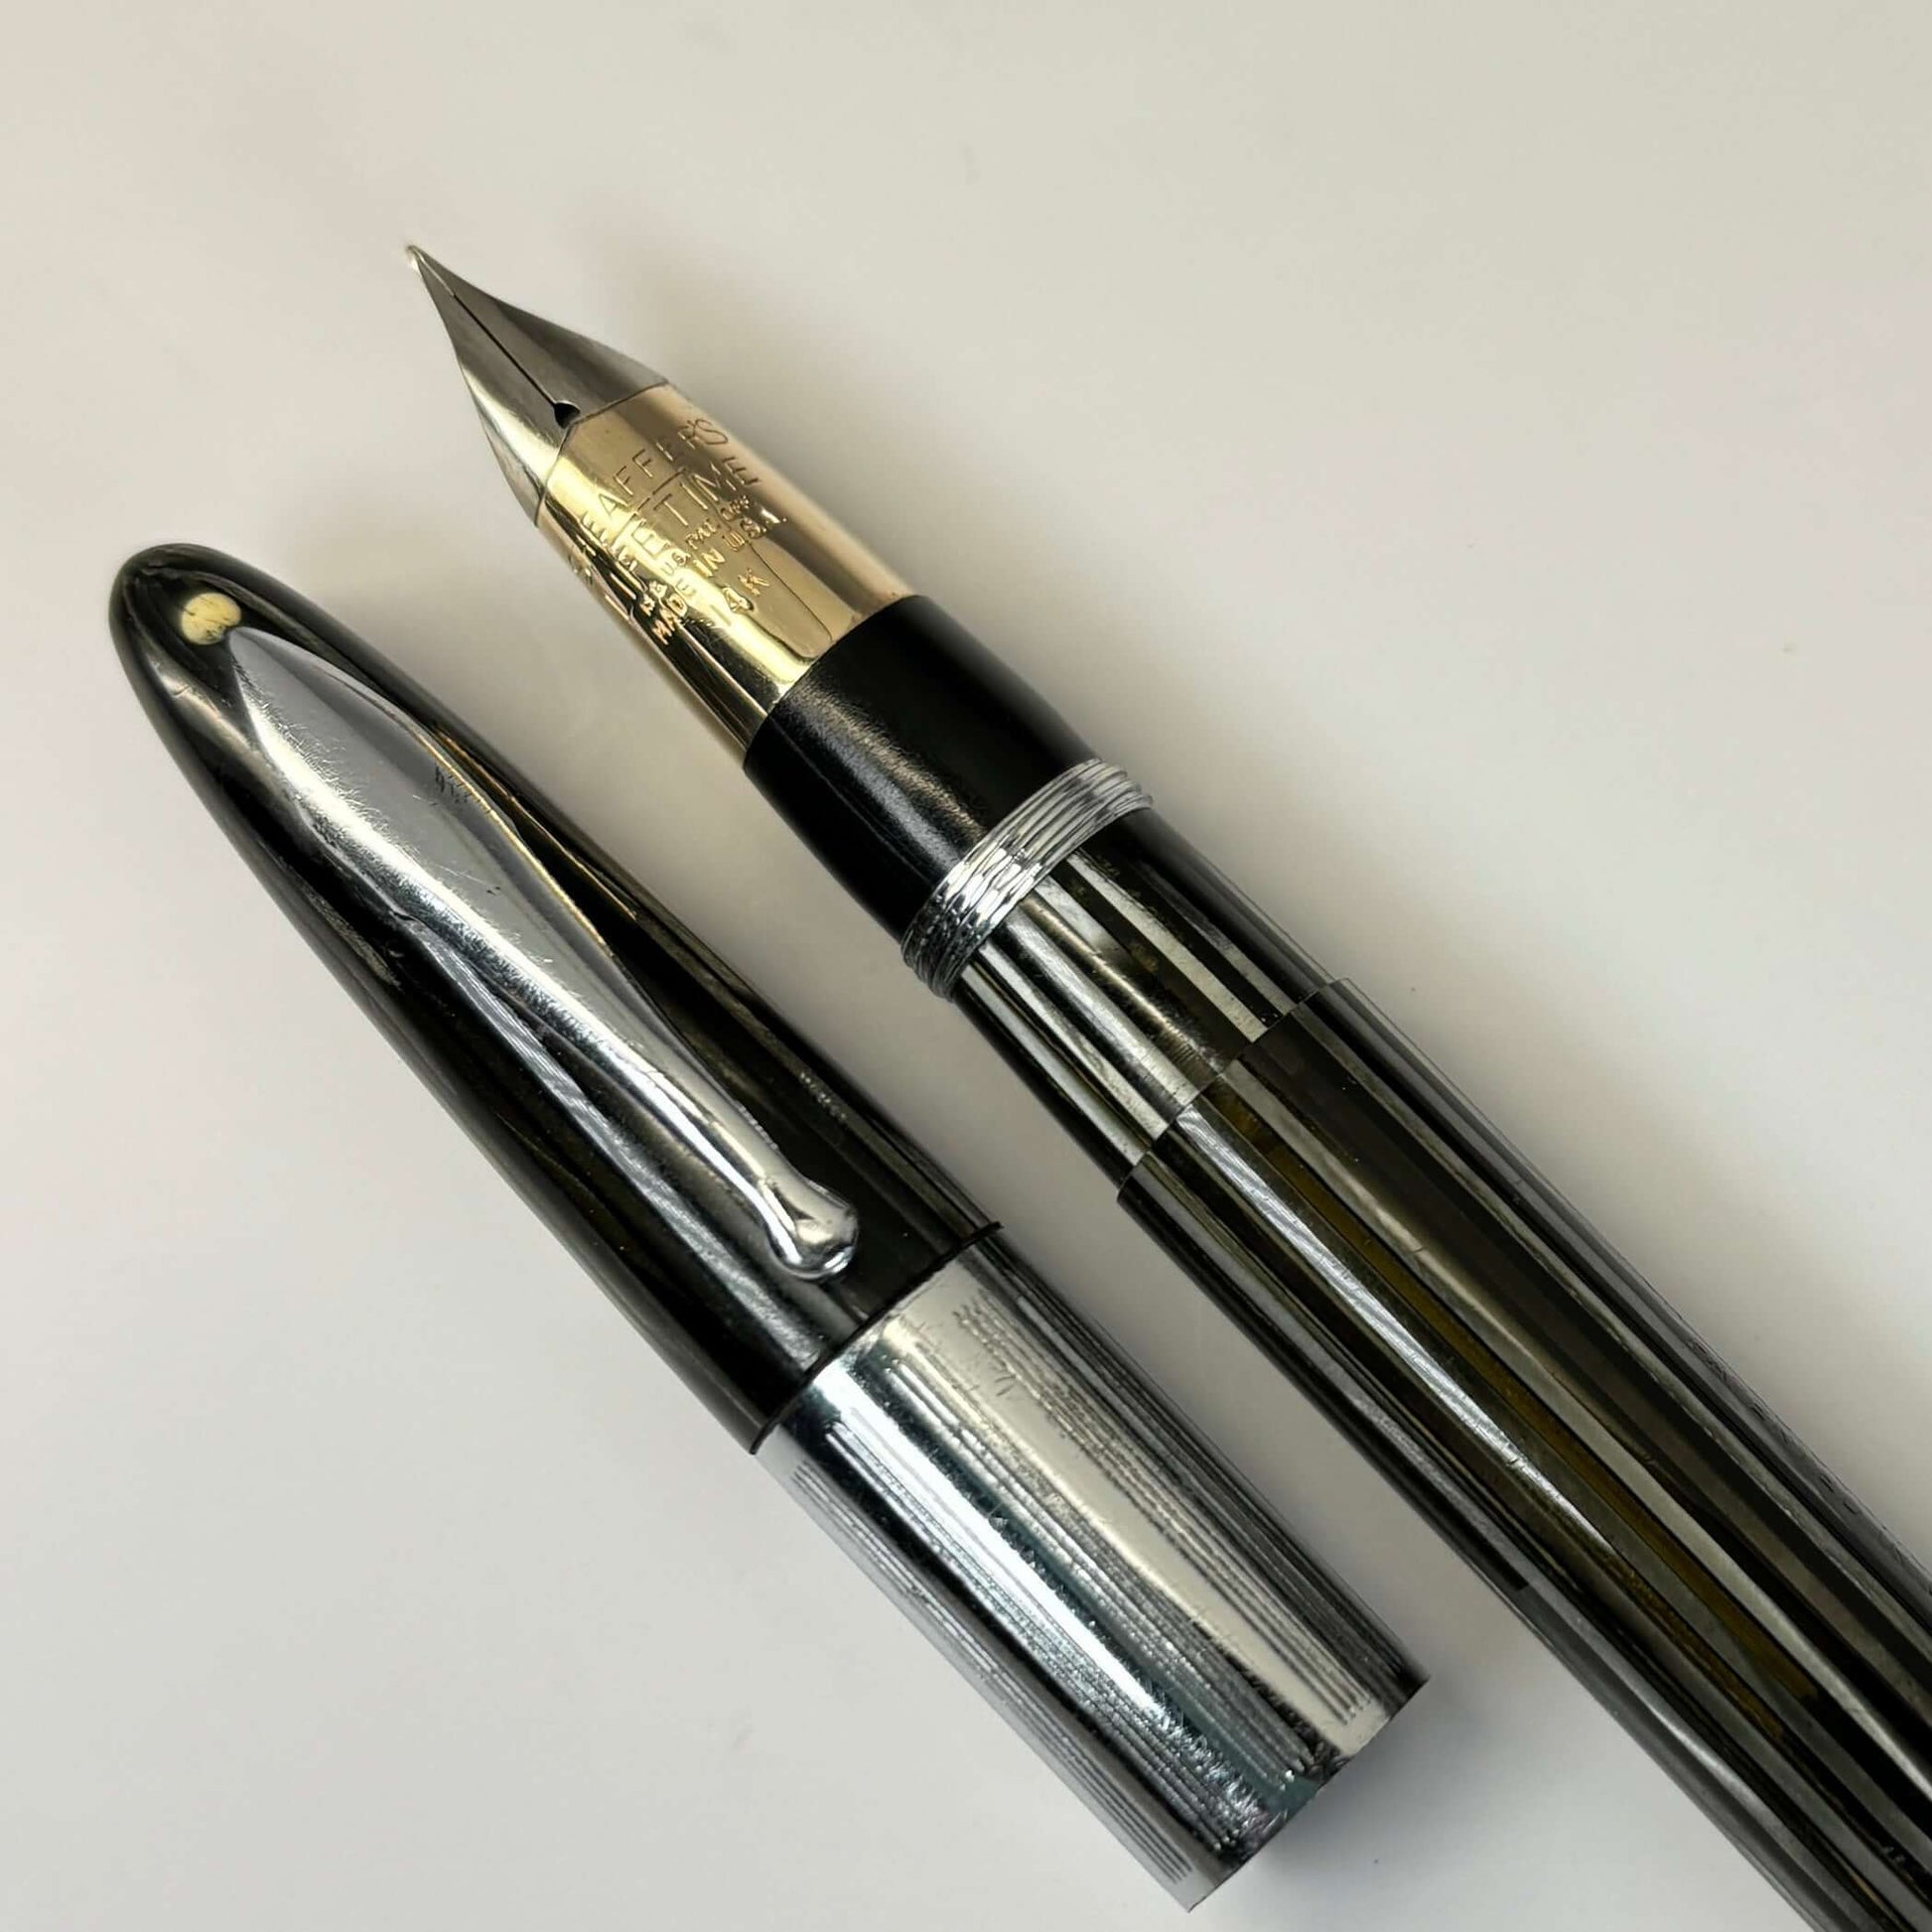 1940s Sheaffer Triumph Vac-fil, Extra-wide cap Band, Pearl Grey with Chrome trim. Medium Two-tone Nib Length: 5 1/8 Filling System: Vacuum-Fil; restored with new seals Color/Pattern: Pearl Grey with chrome trim Nib Type/Condition and remarks: Medium two-t